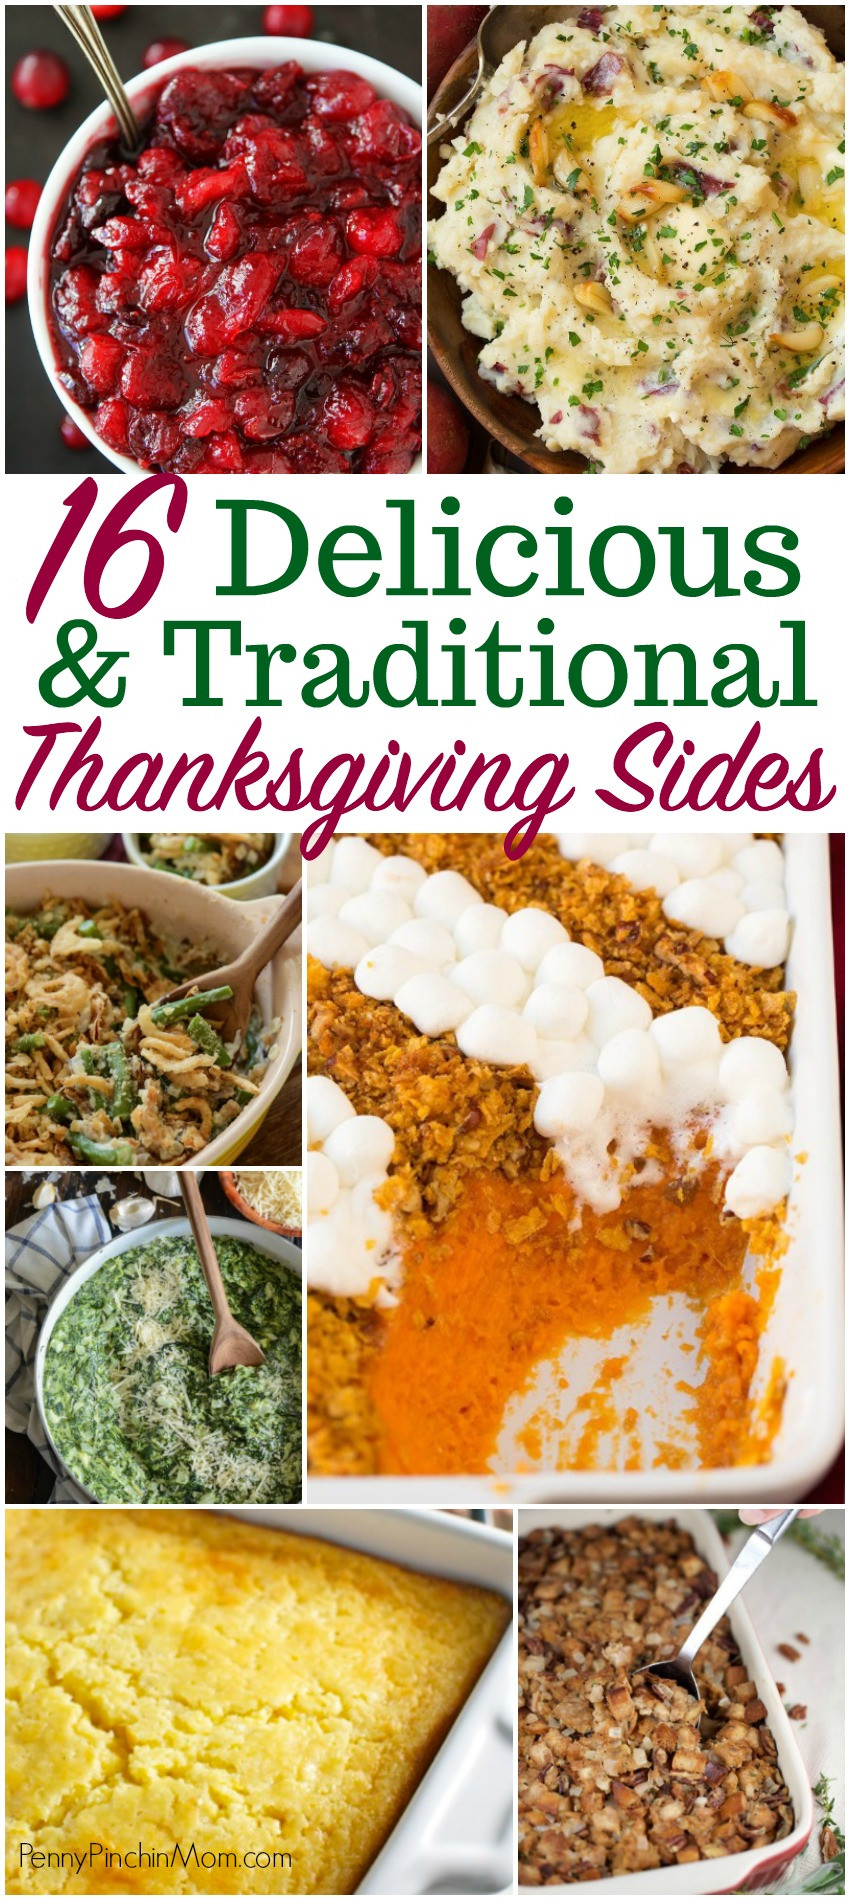 Delicious Thanksgiving Side Dishes
 16 Delicious & Traditional Thanksgiving Side Dishes